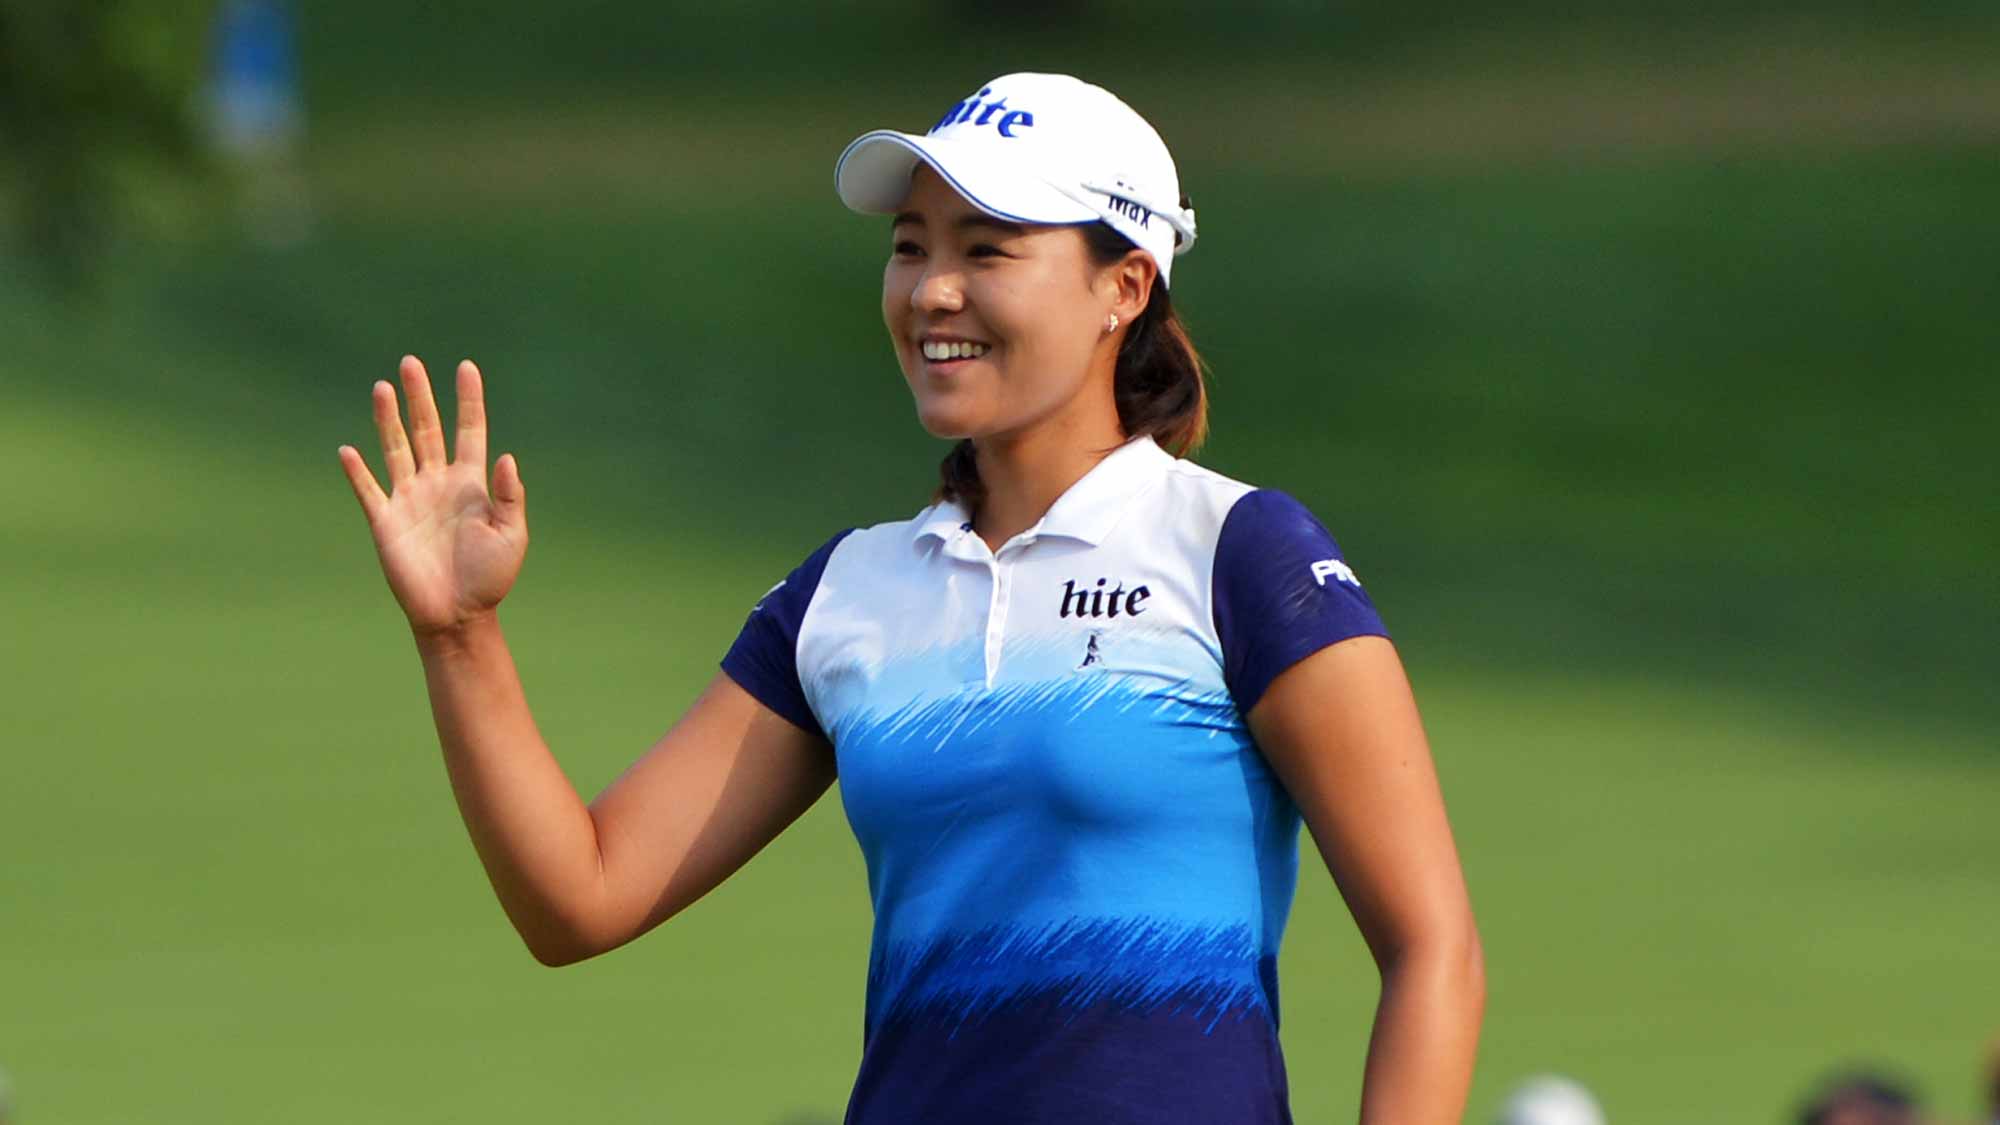 In Gee Chun of South Korea waves to the gallery after making birdie on the 16th hole during the final round of the U.S. Women's Open at Lancaster Country Club